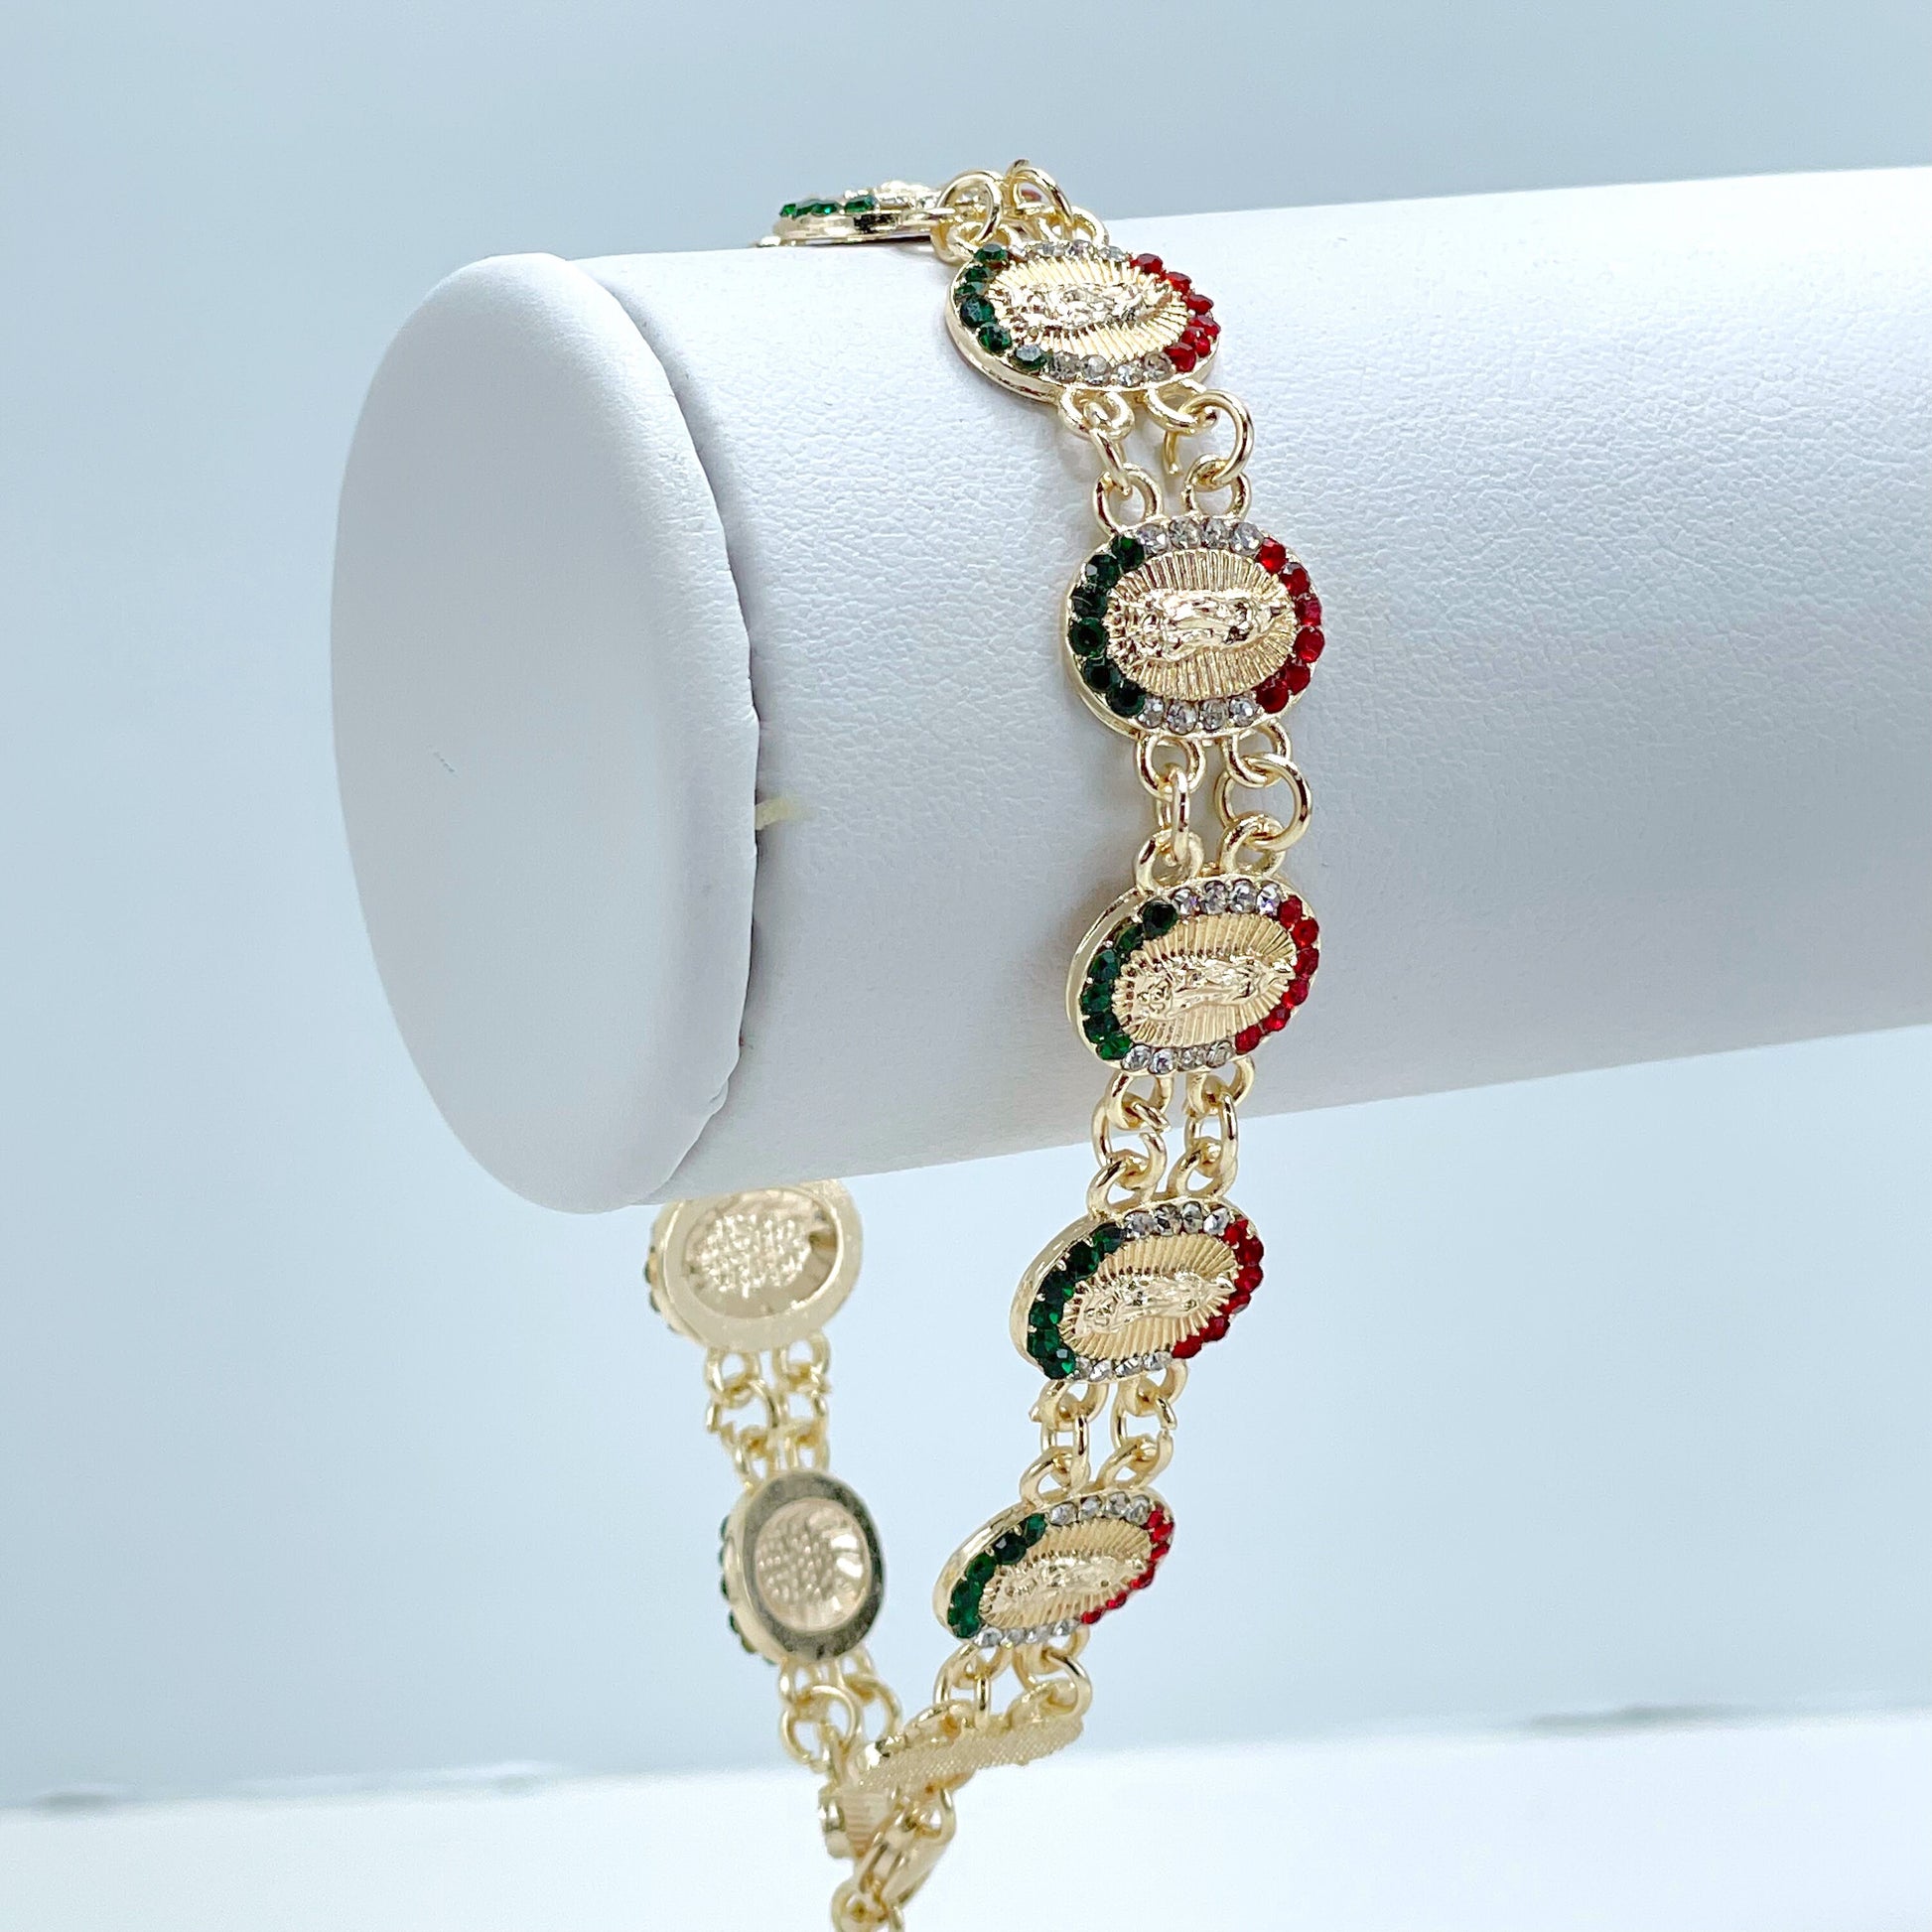 18k Gold Filled Three Red, White and Green Zirconia, Guadalupe Virgin Bracelet, Wholesale and Jewelry Supplies